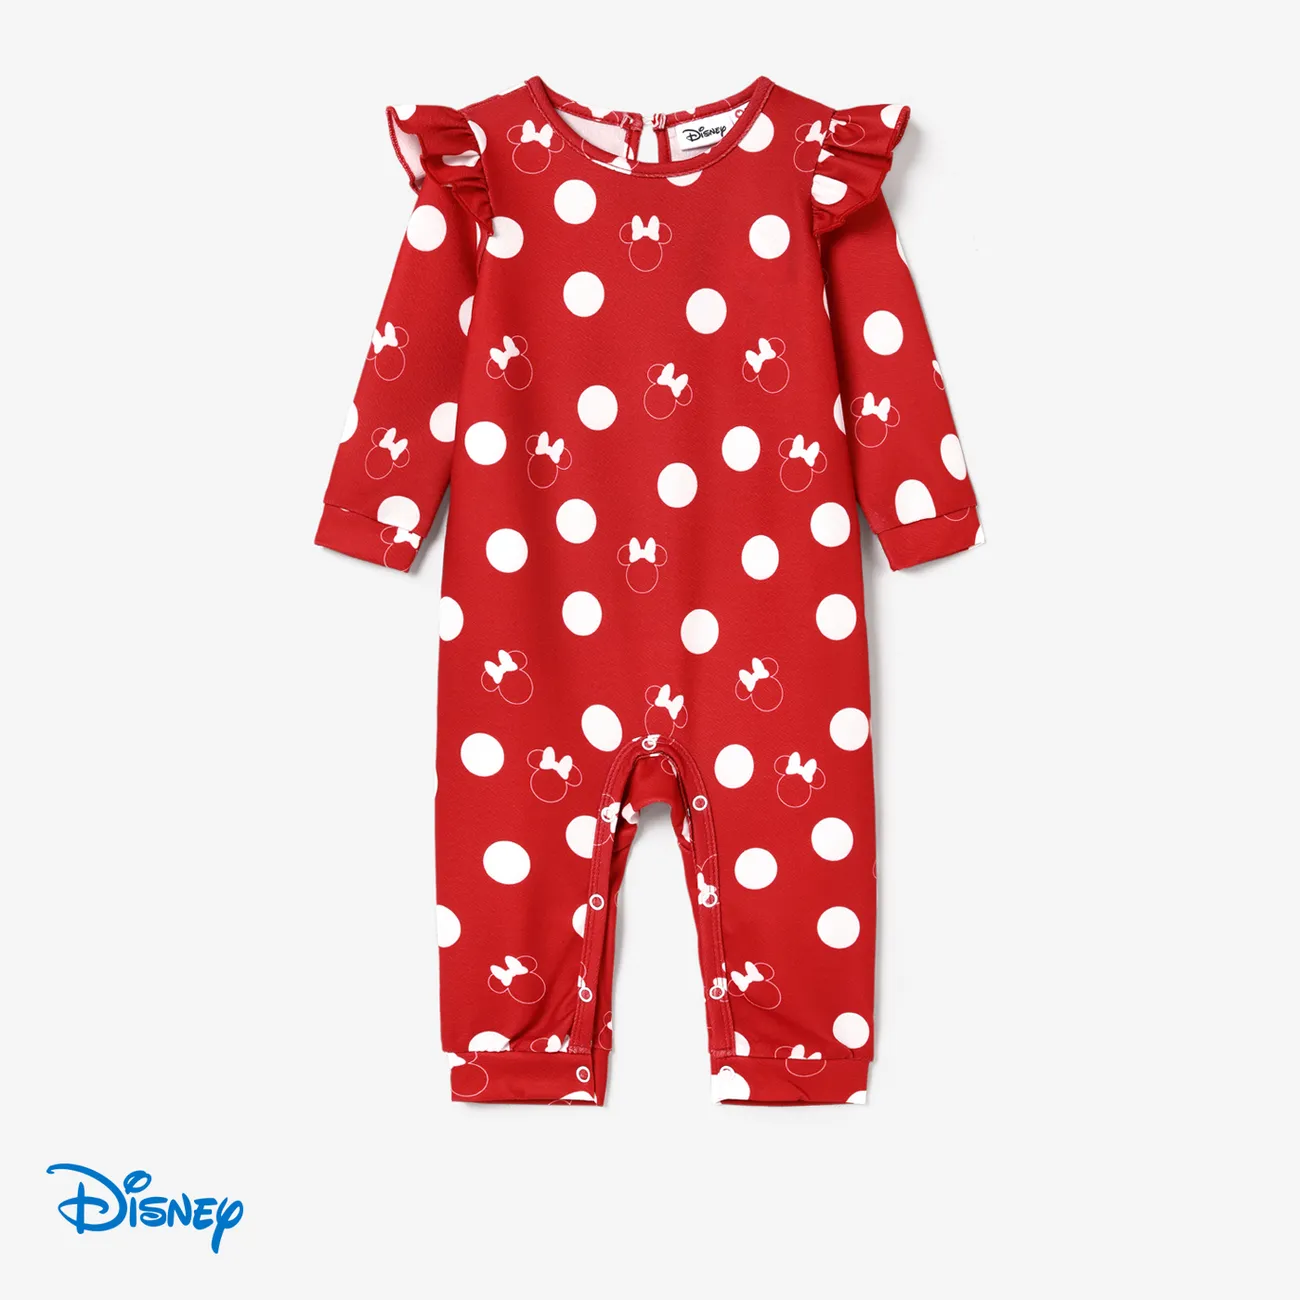 Disney Mickey and Friends Look Familial Manches longues Tenues de famille assorties Ensemble Rouge big image 1